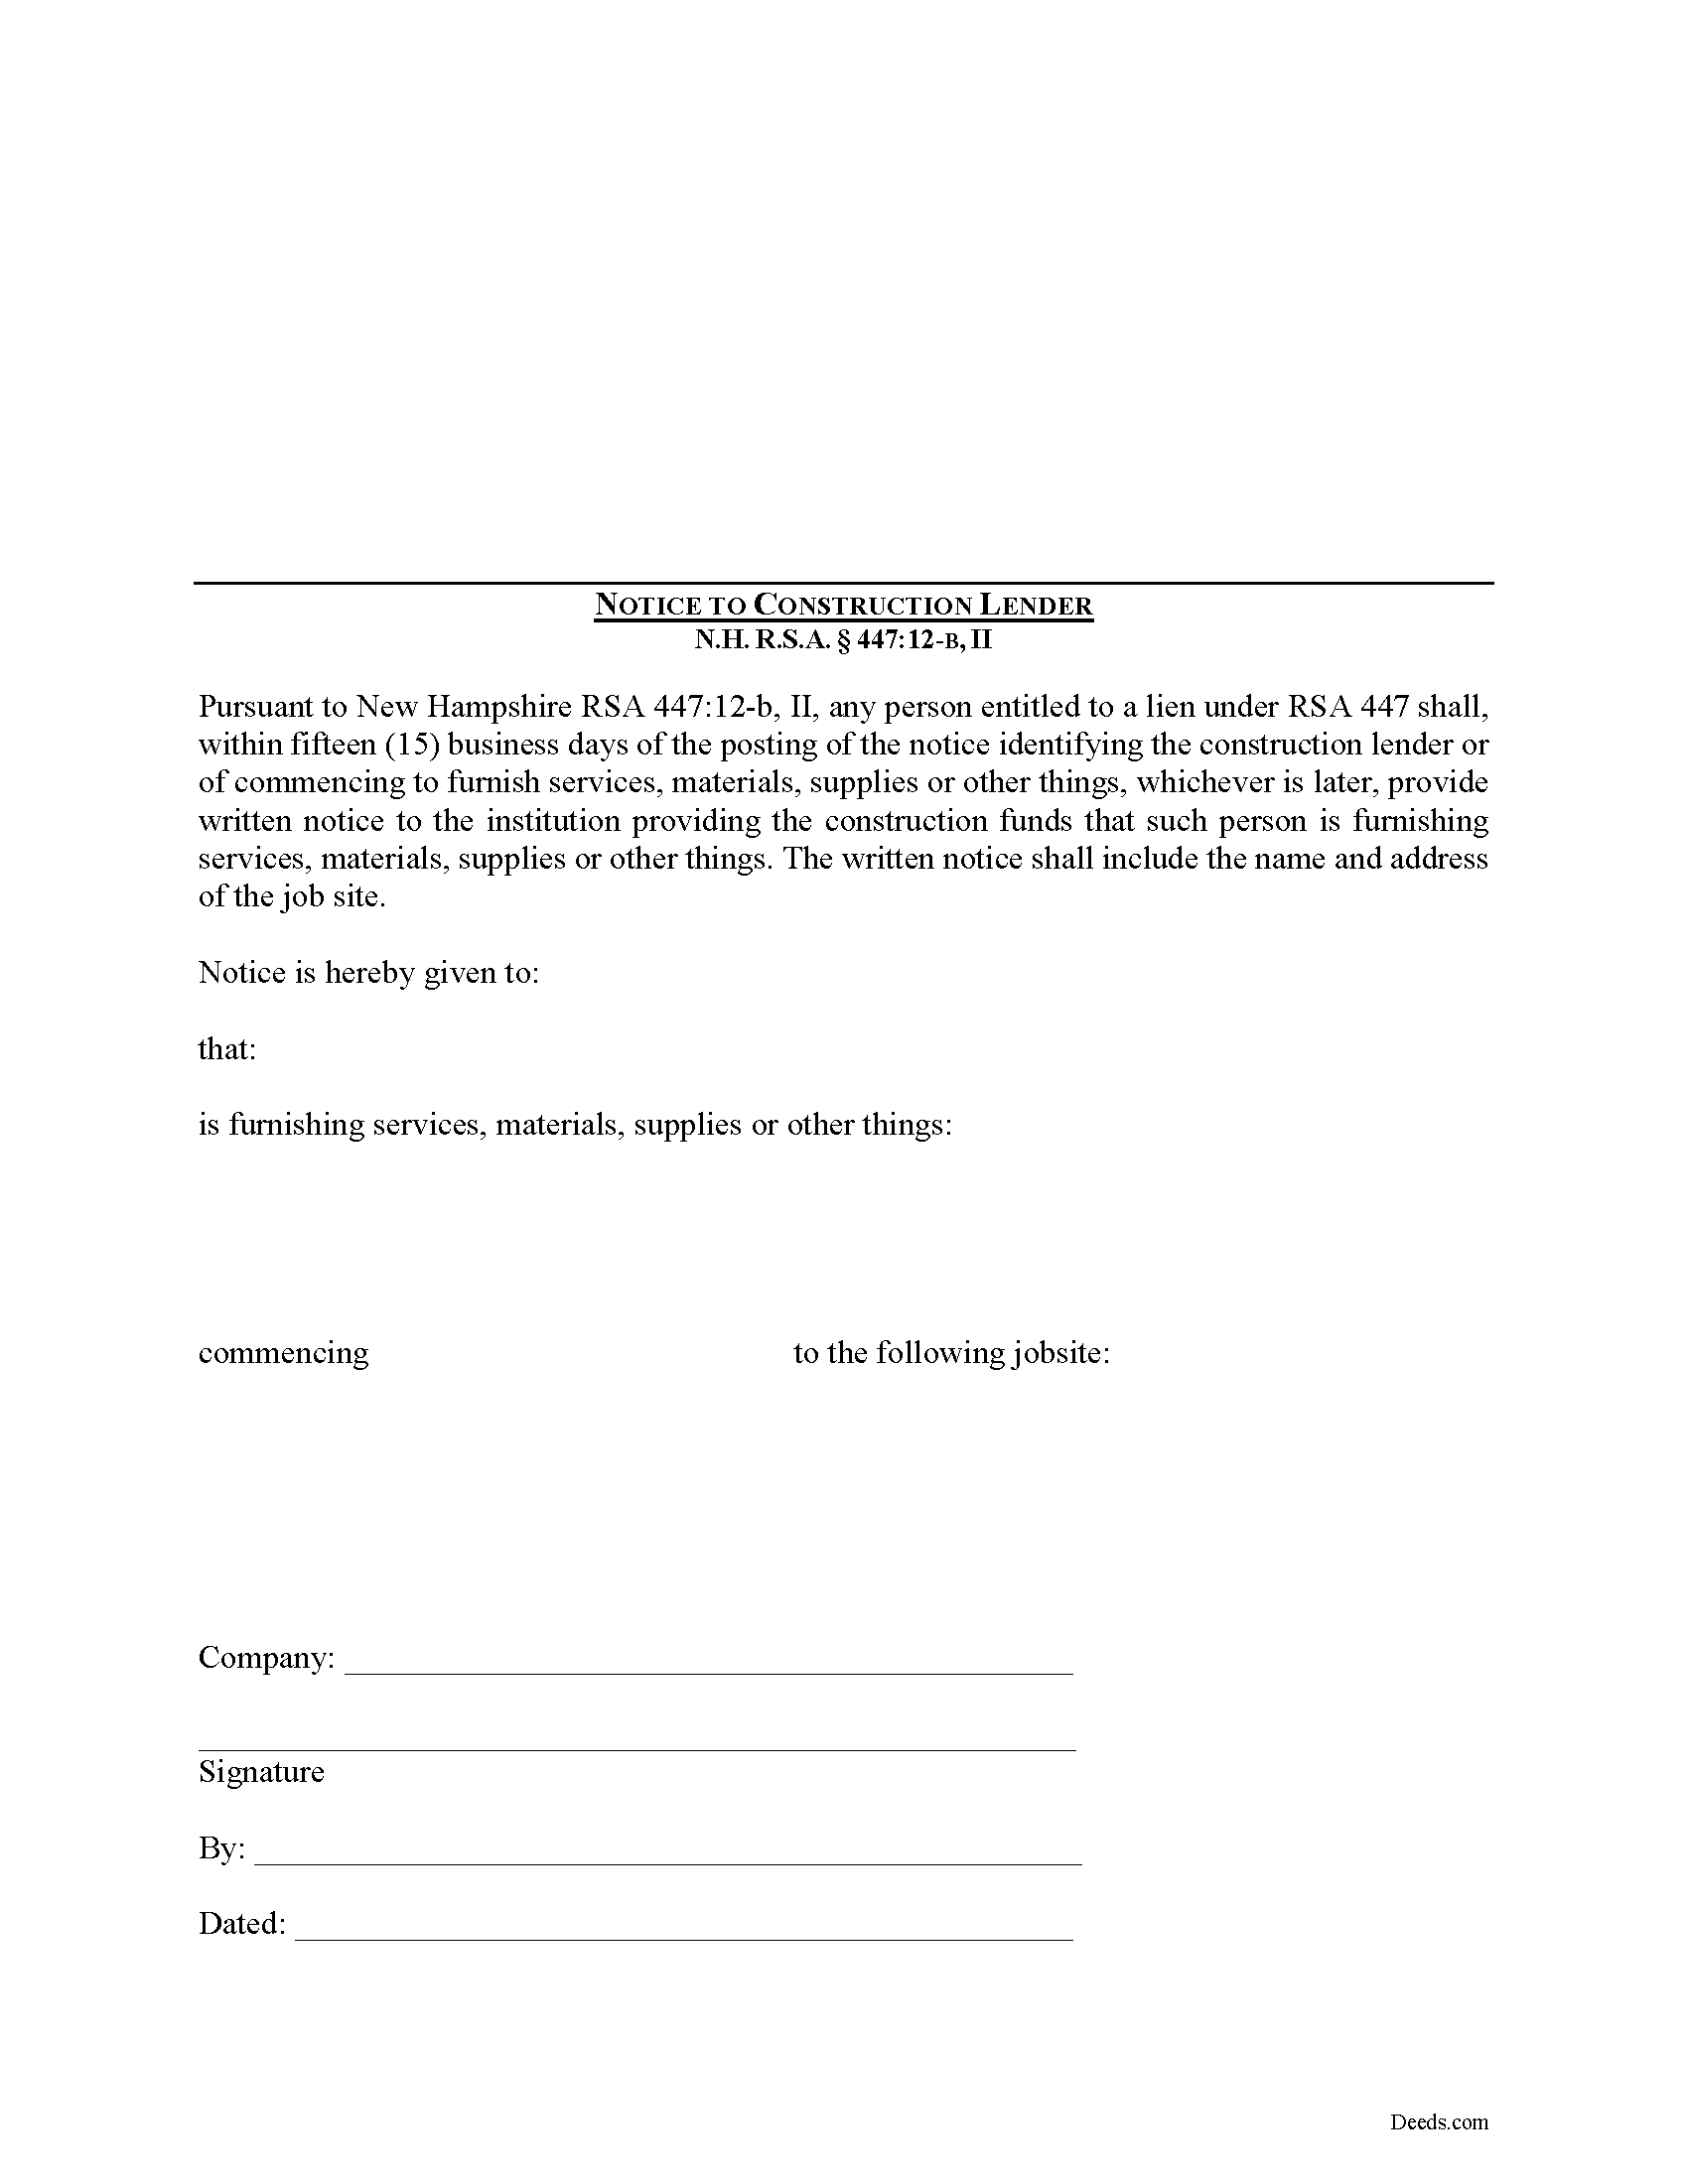 Notice to Construction Lender Form